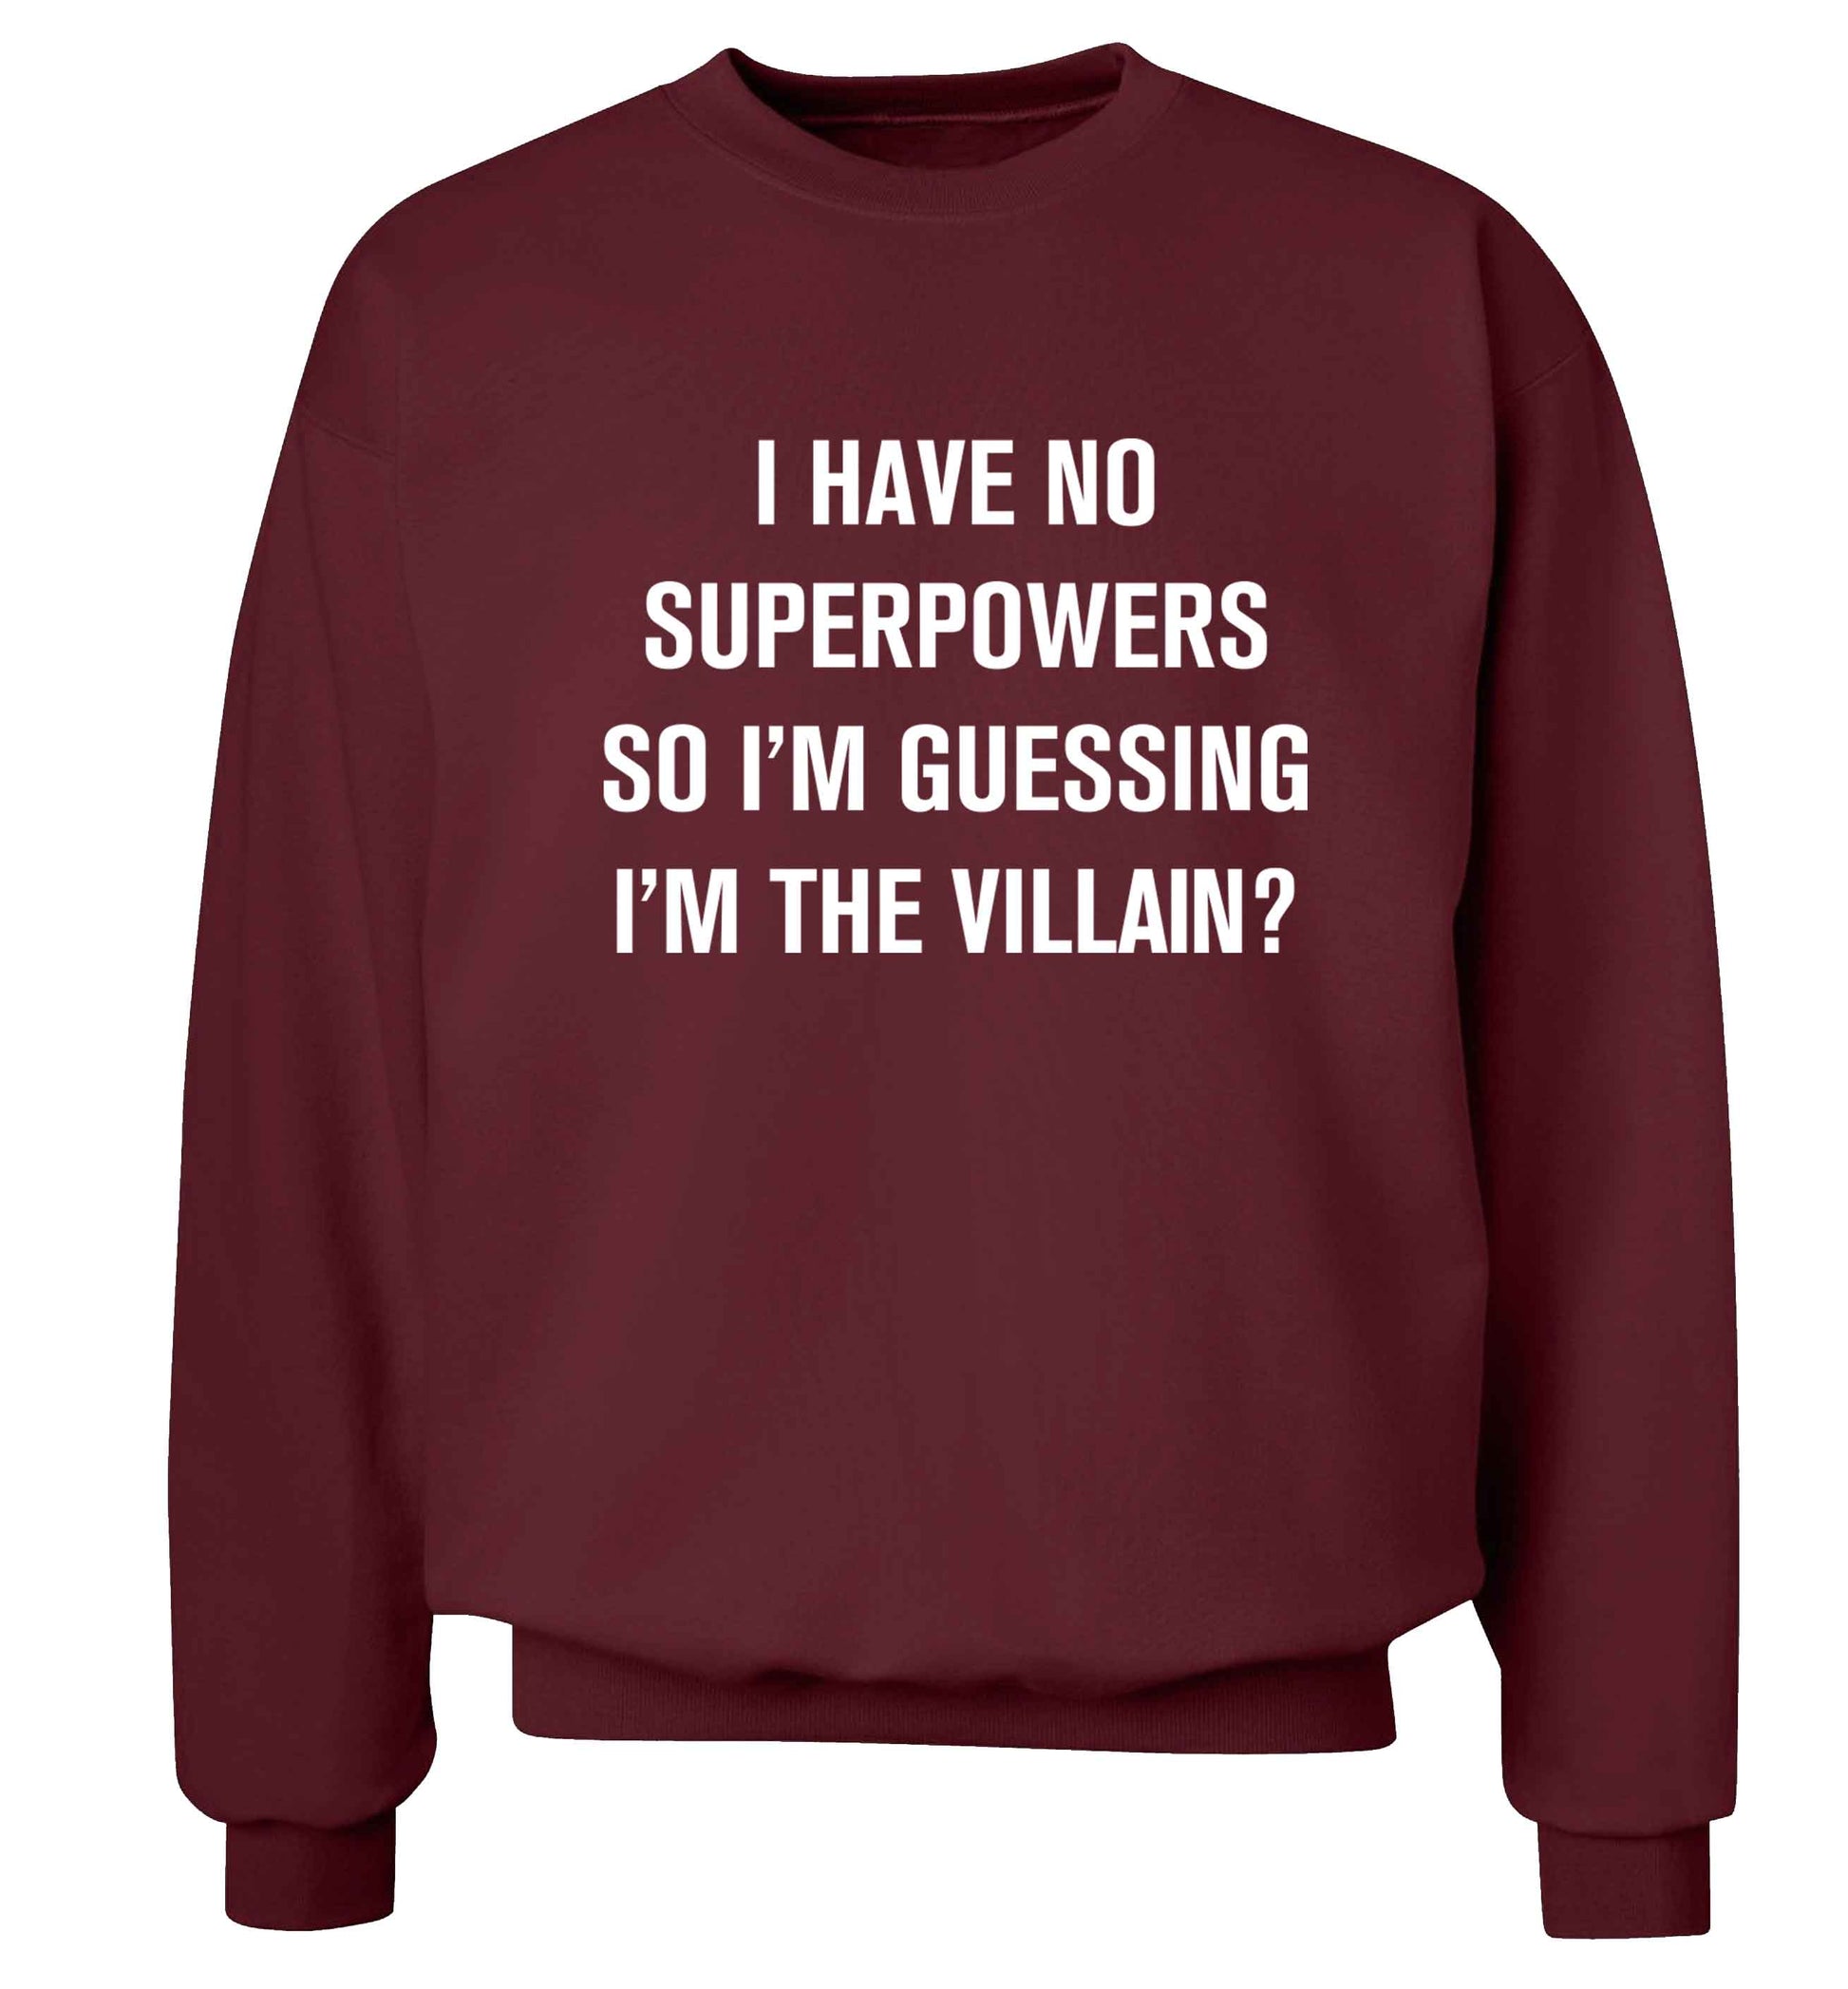 I have no superpowers so I'm guessing I'm the villain? Adult's unisex maroon Sweater 2XL